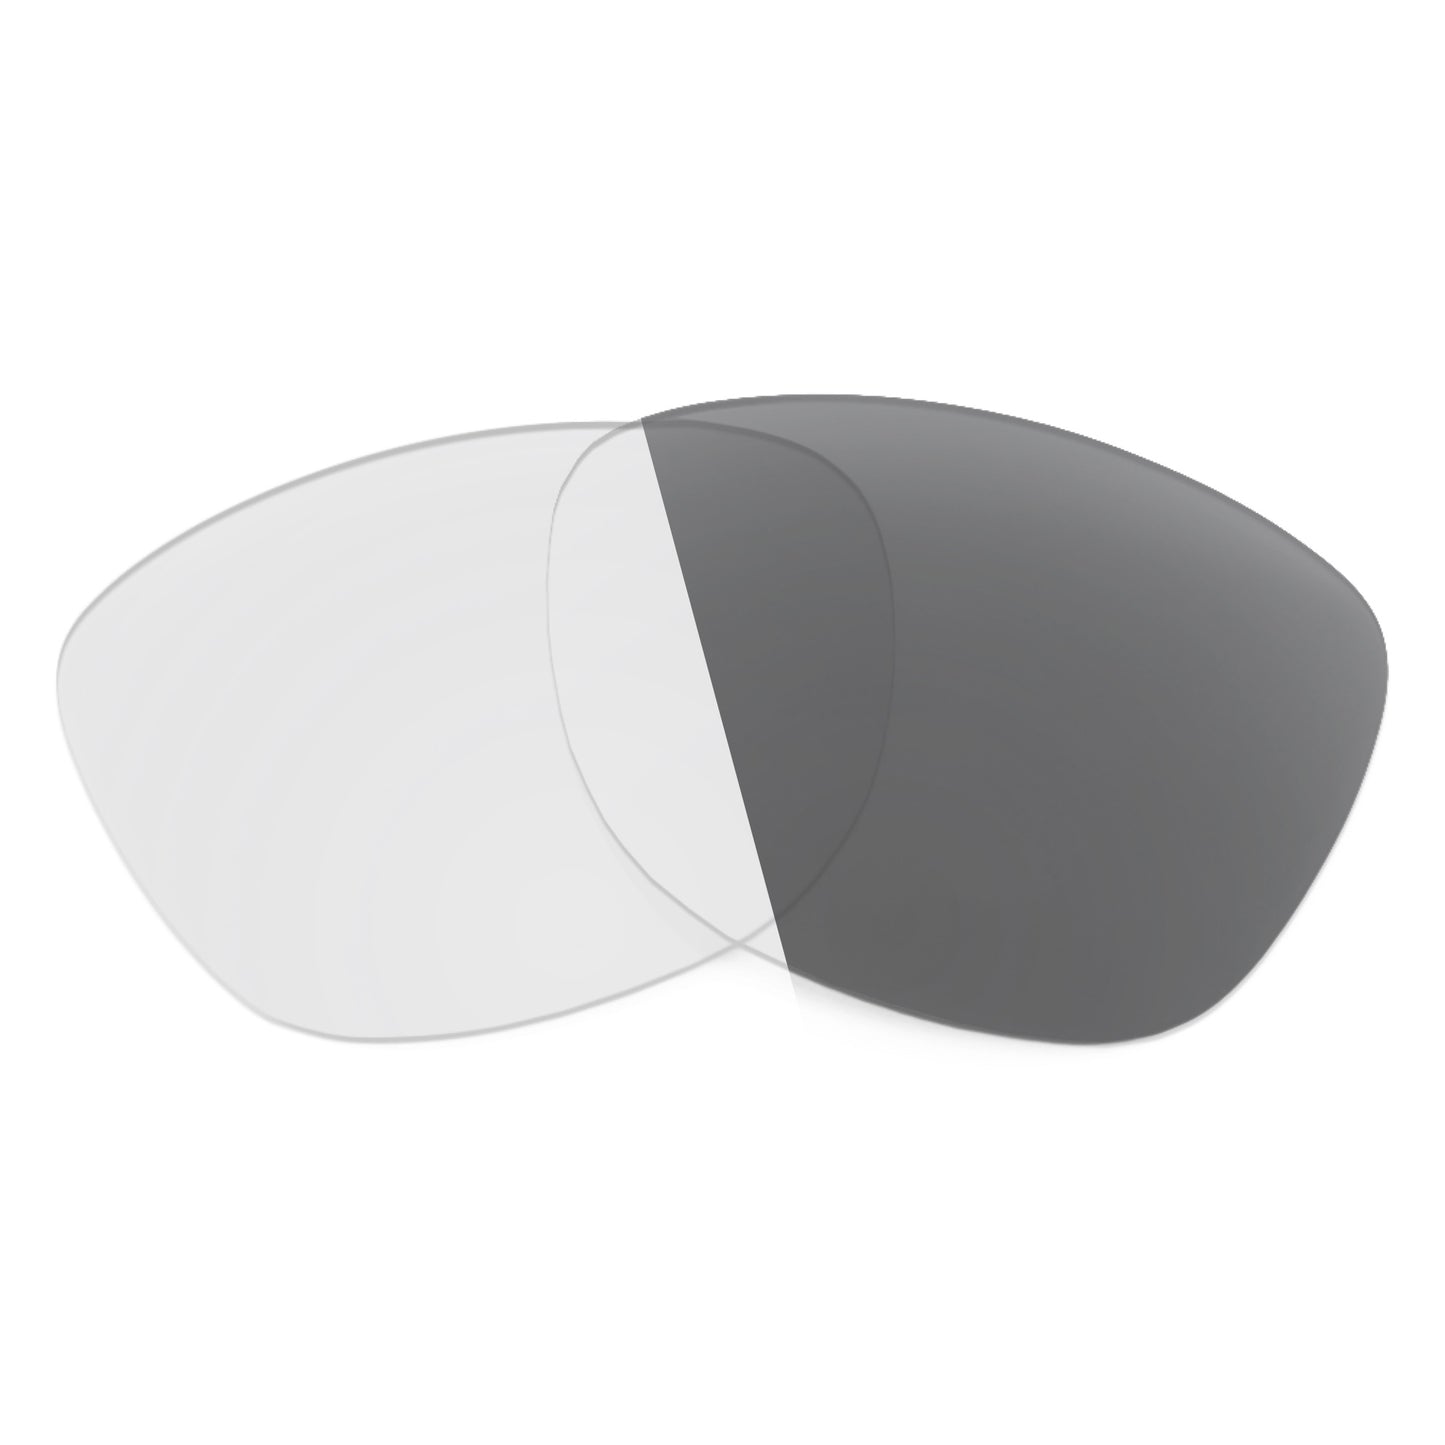 Revant replacement lenses for Ray-Ban RB3516 62mm Non-Polarized Adapt Gray Photochromic